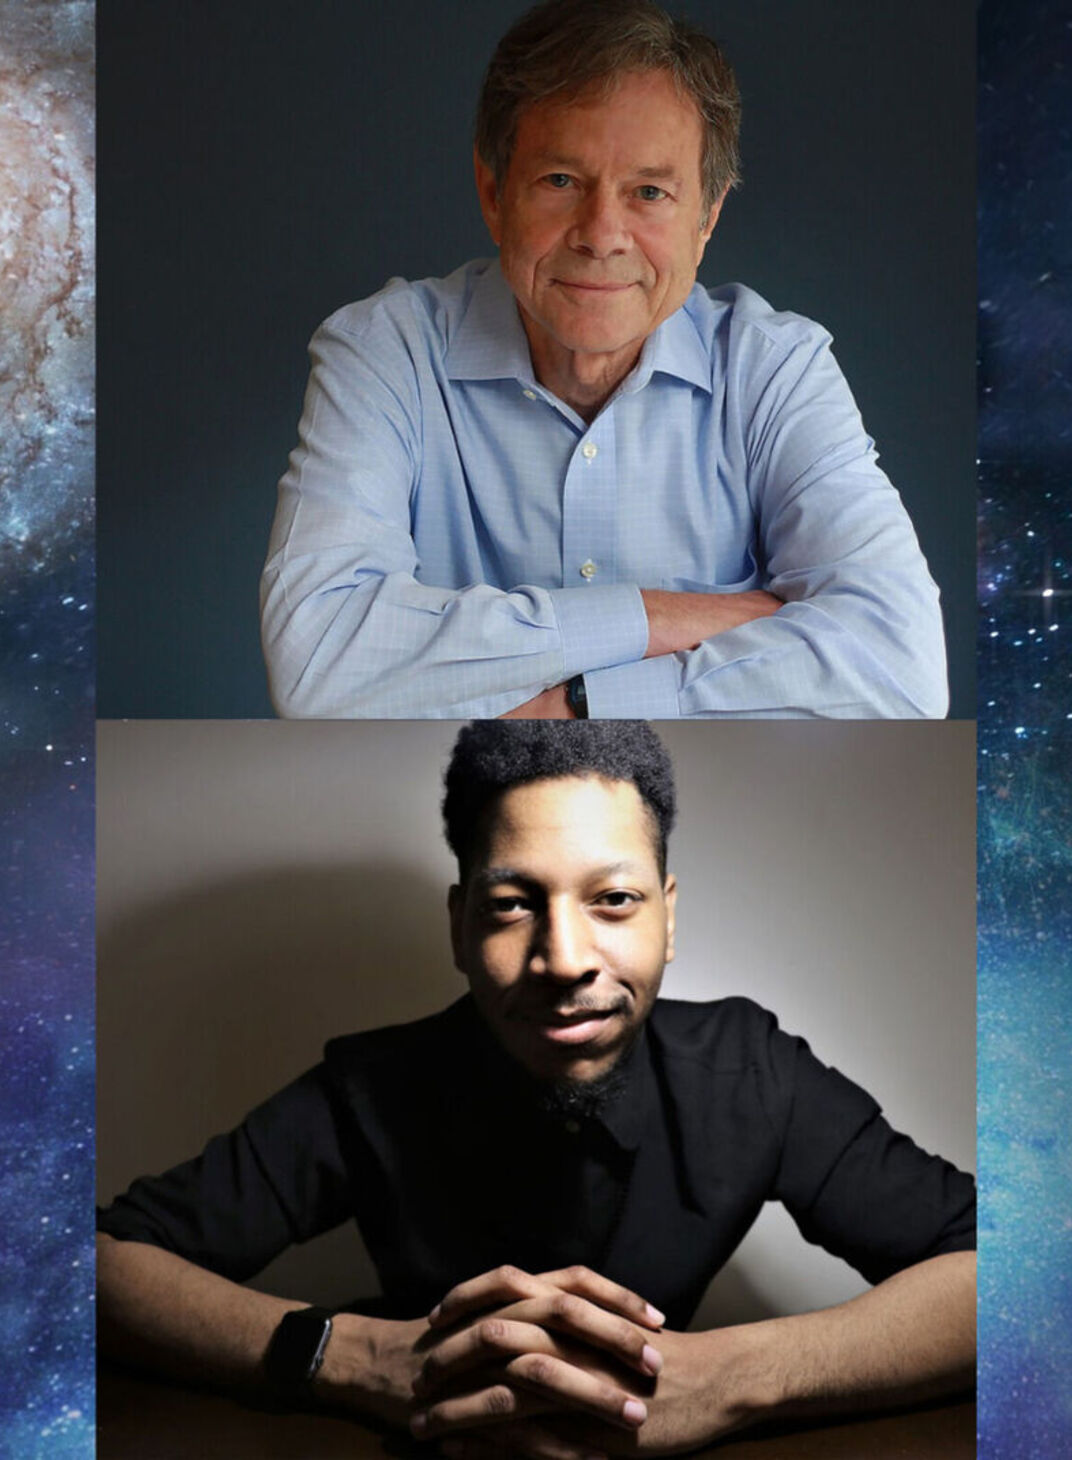 Photos of Alan Lightman and Brian Raphael Nabors on a background of space.